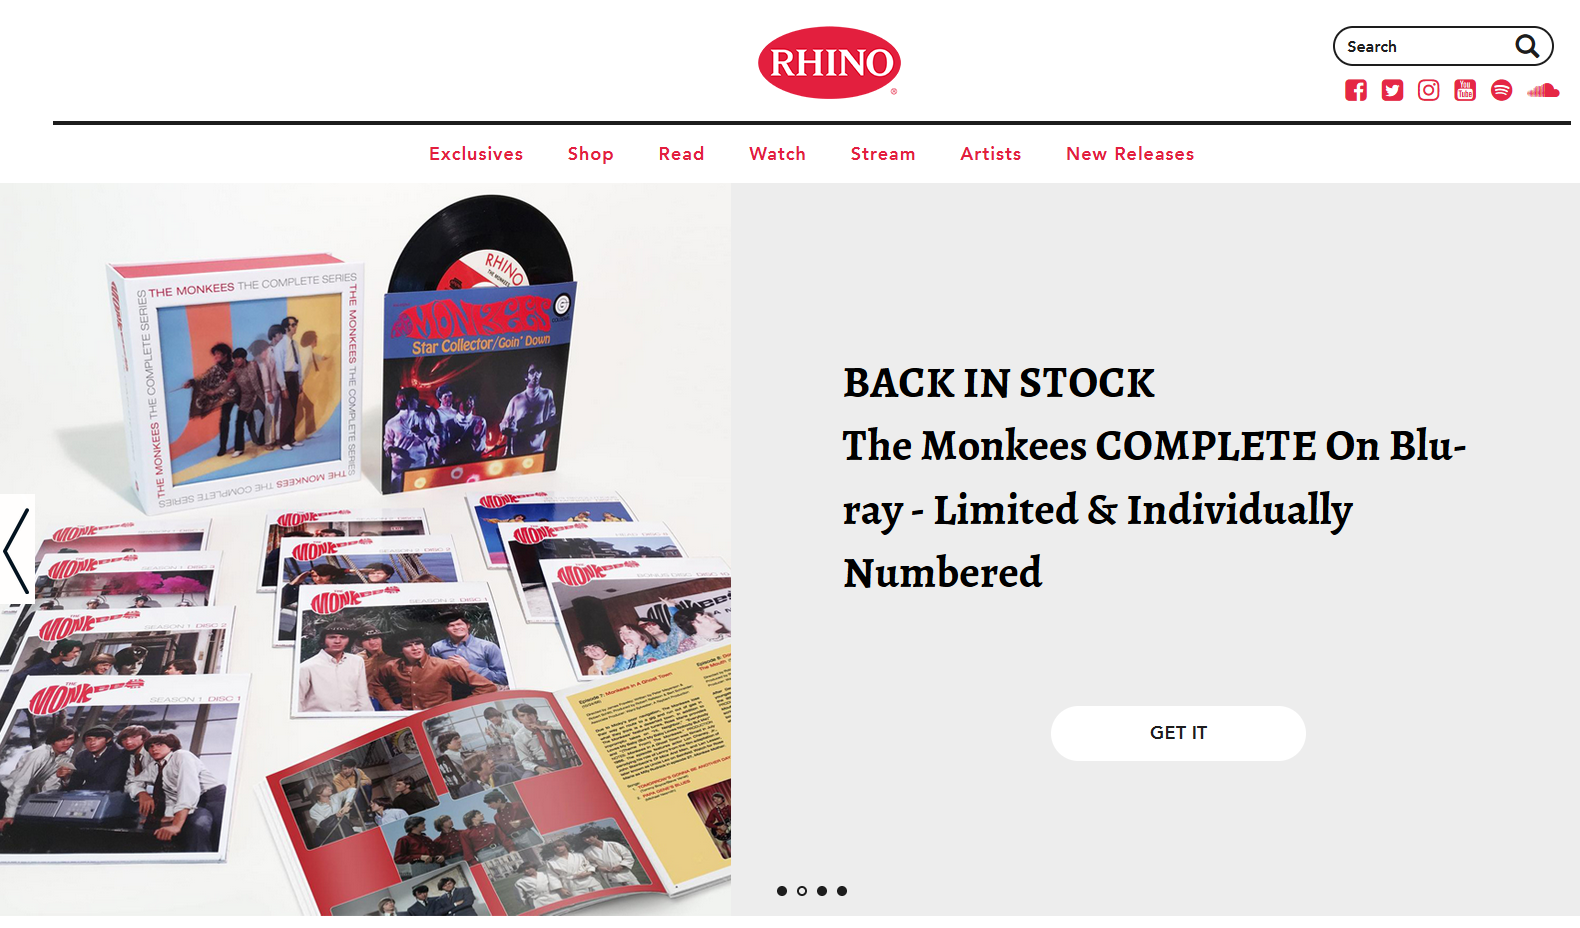 Monkees Limited Blu ray set back in stock - DVD Talk Forum